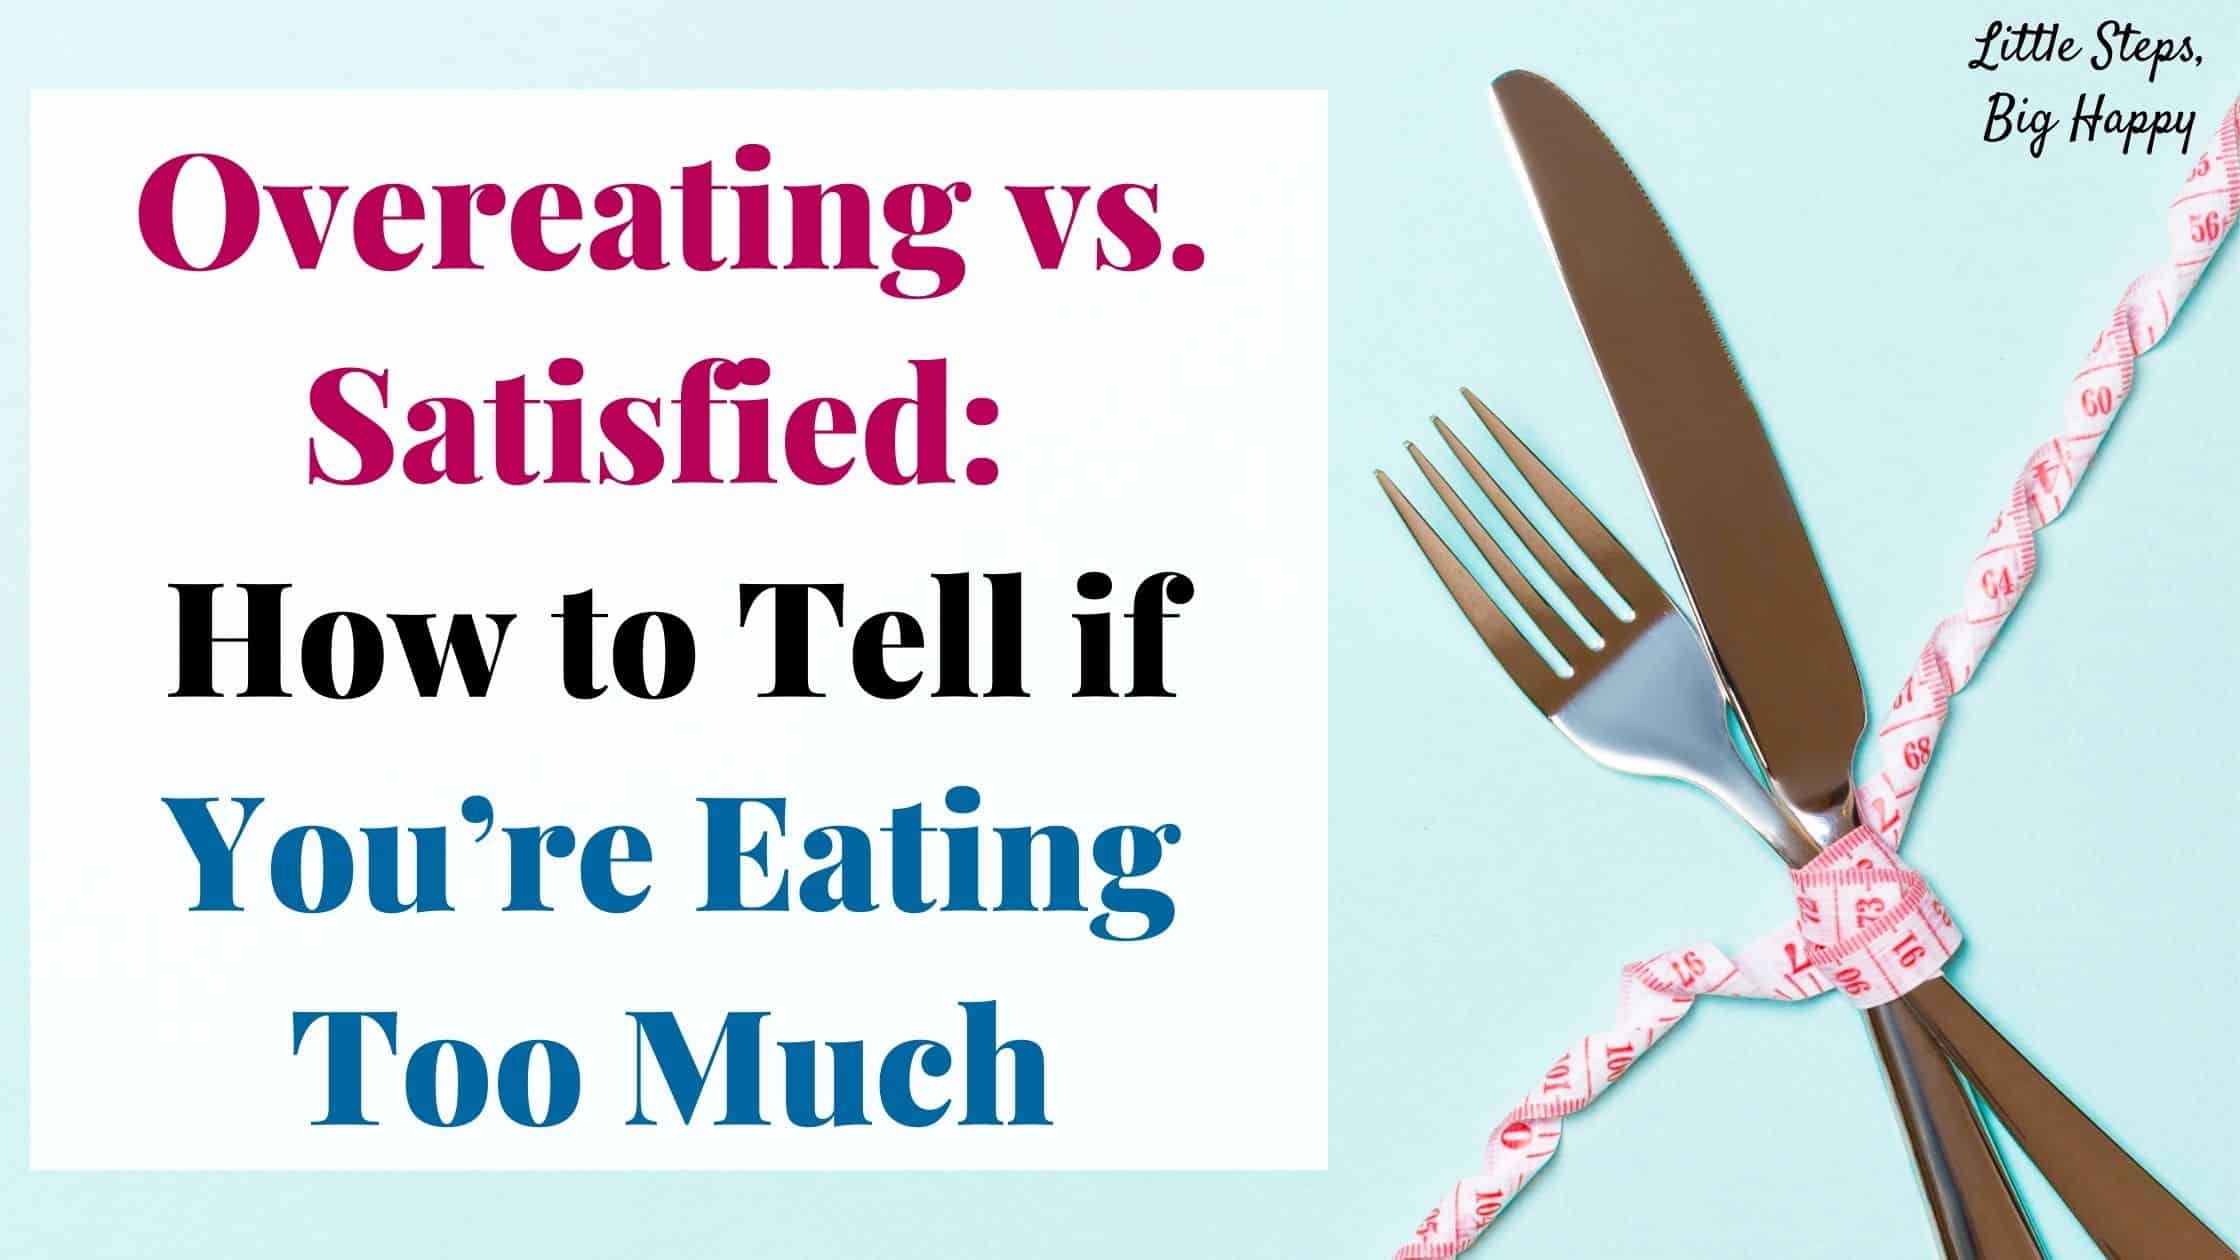 Fork and knife wrapped with a measuring tape. Text: Overeating vs. Satisfied: How to Tell if You're Eating Too Much